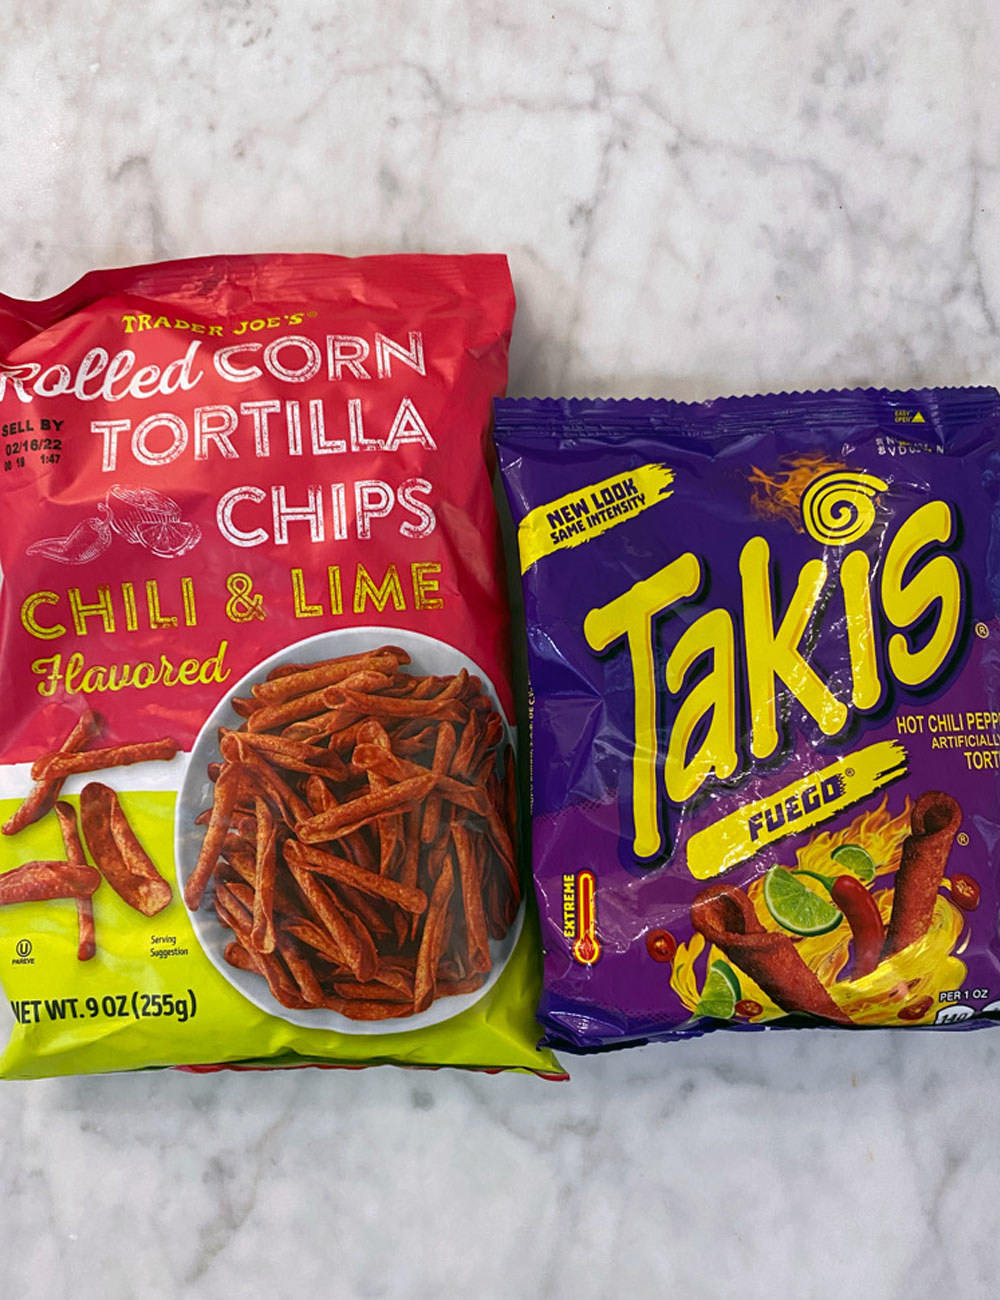 Rolled Corn Chili Lime Tortilla Chips and Takis in bags